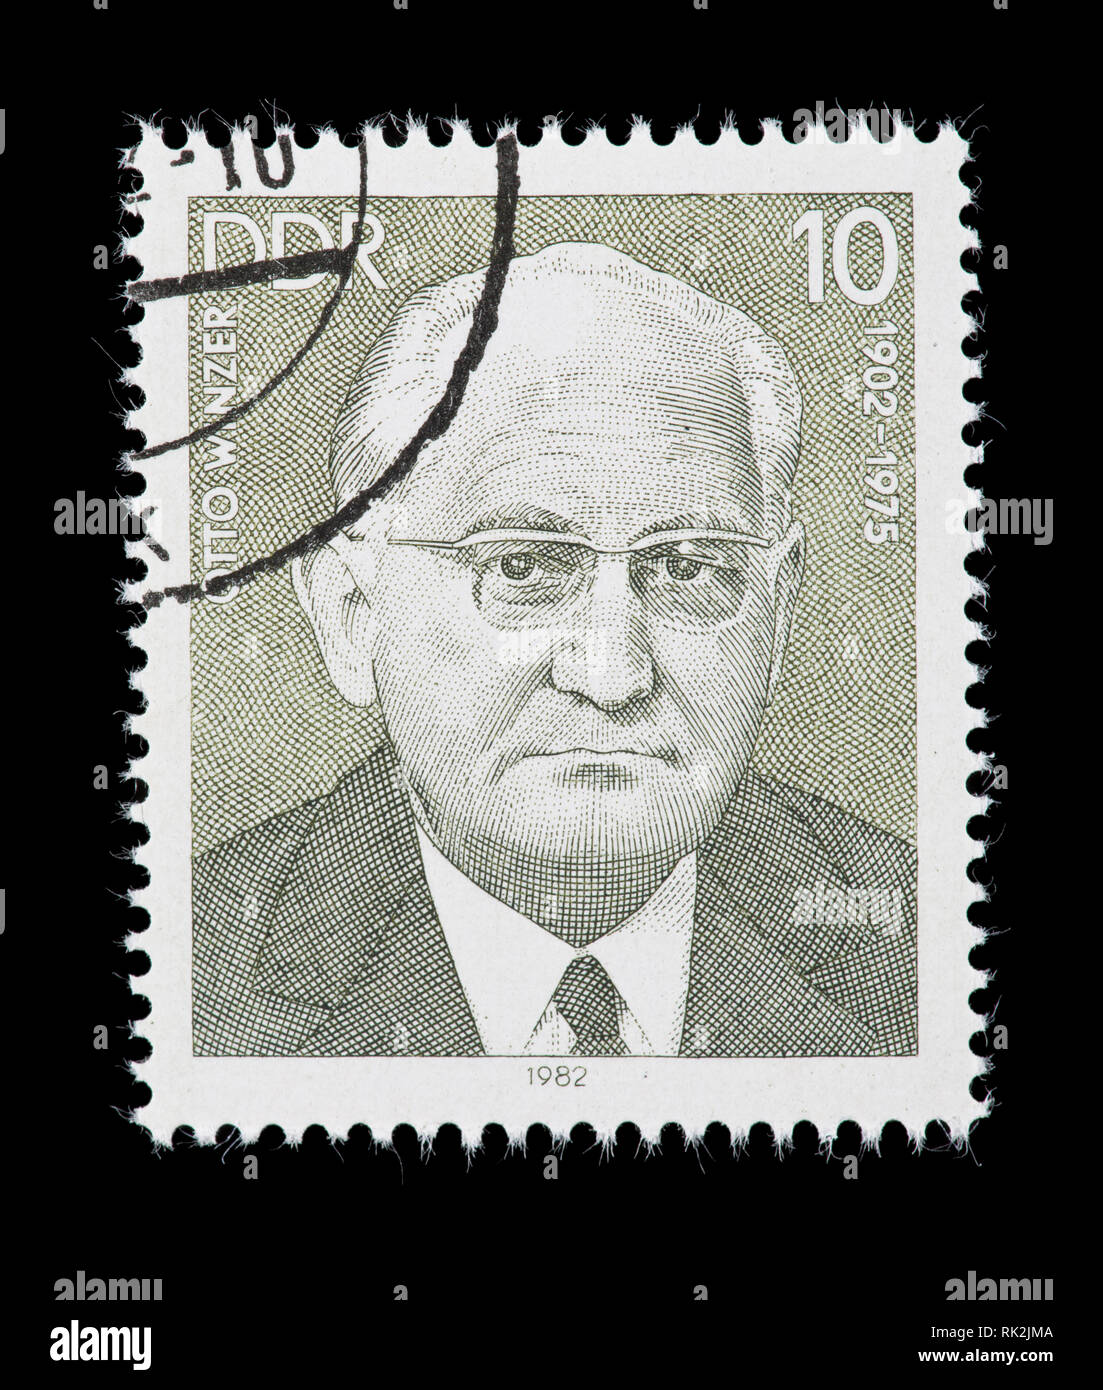 Postage stamp from East Germany (DDR) depicting Otto Winzer Stock Photo